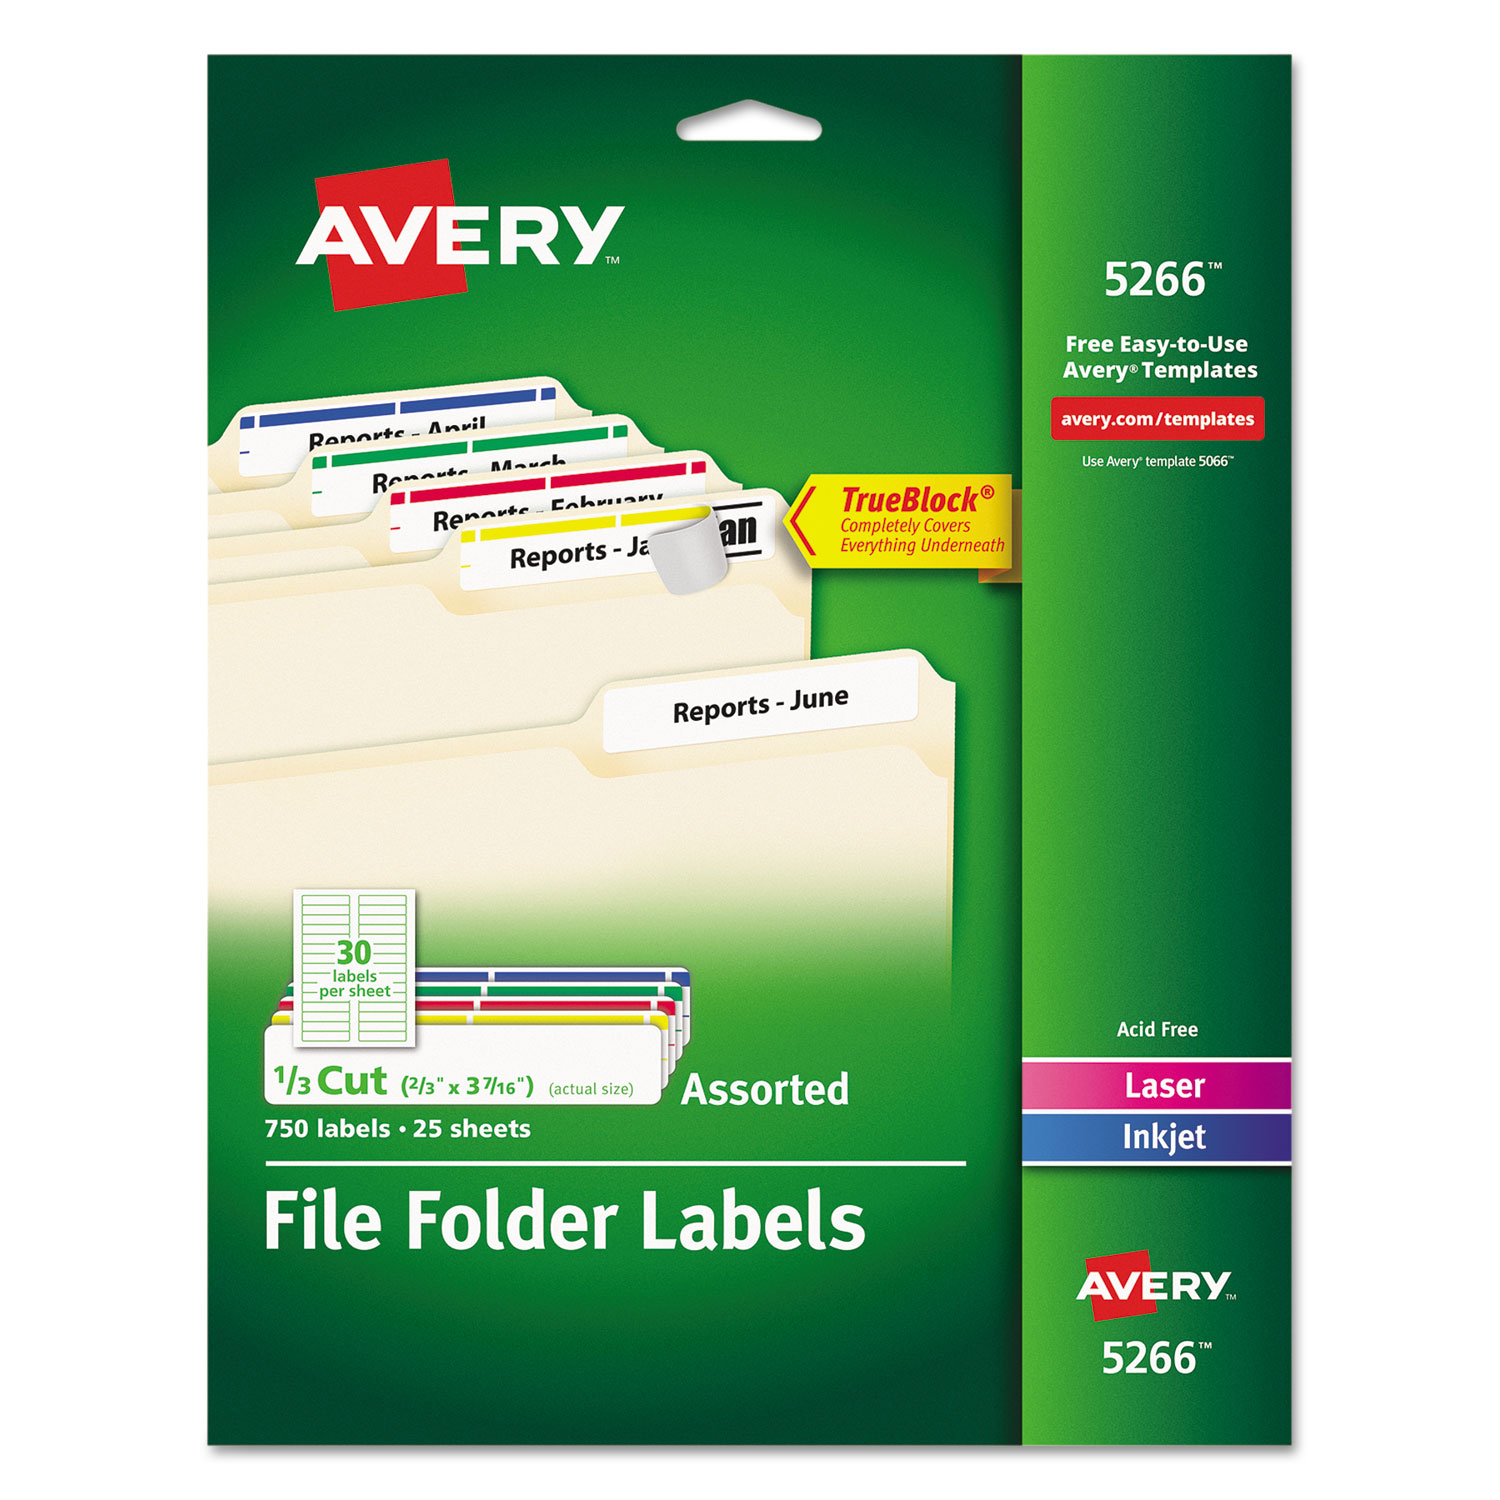 shop for permanent file folder labels with trueblock technology and